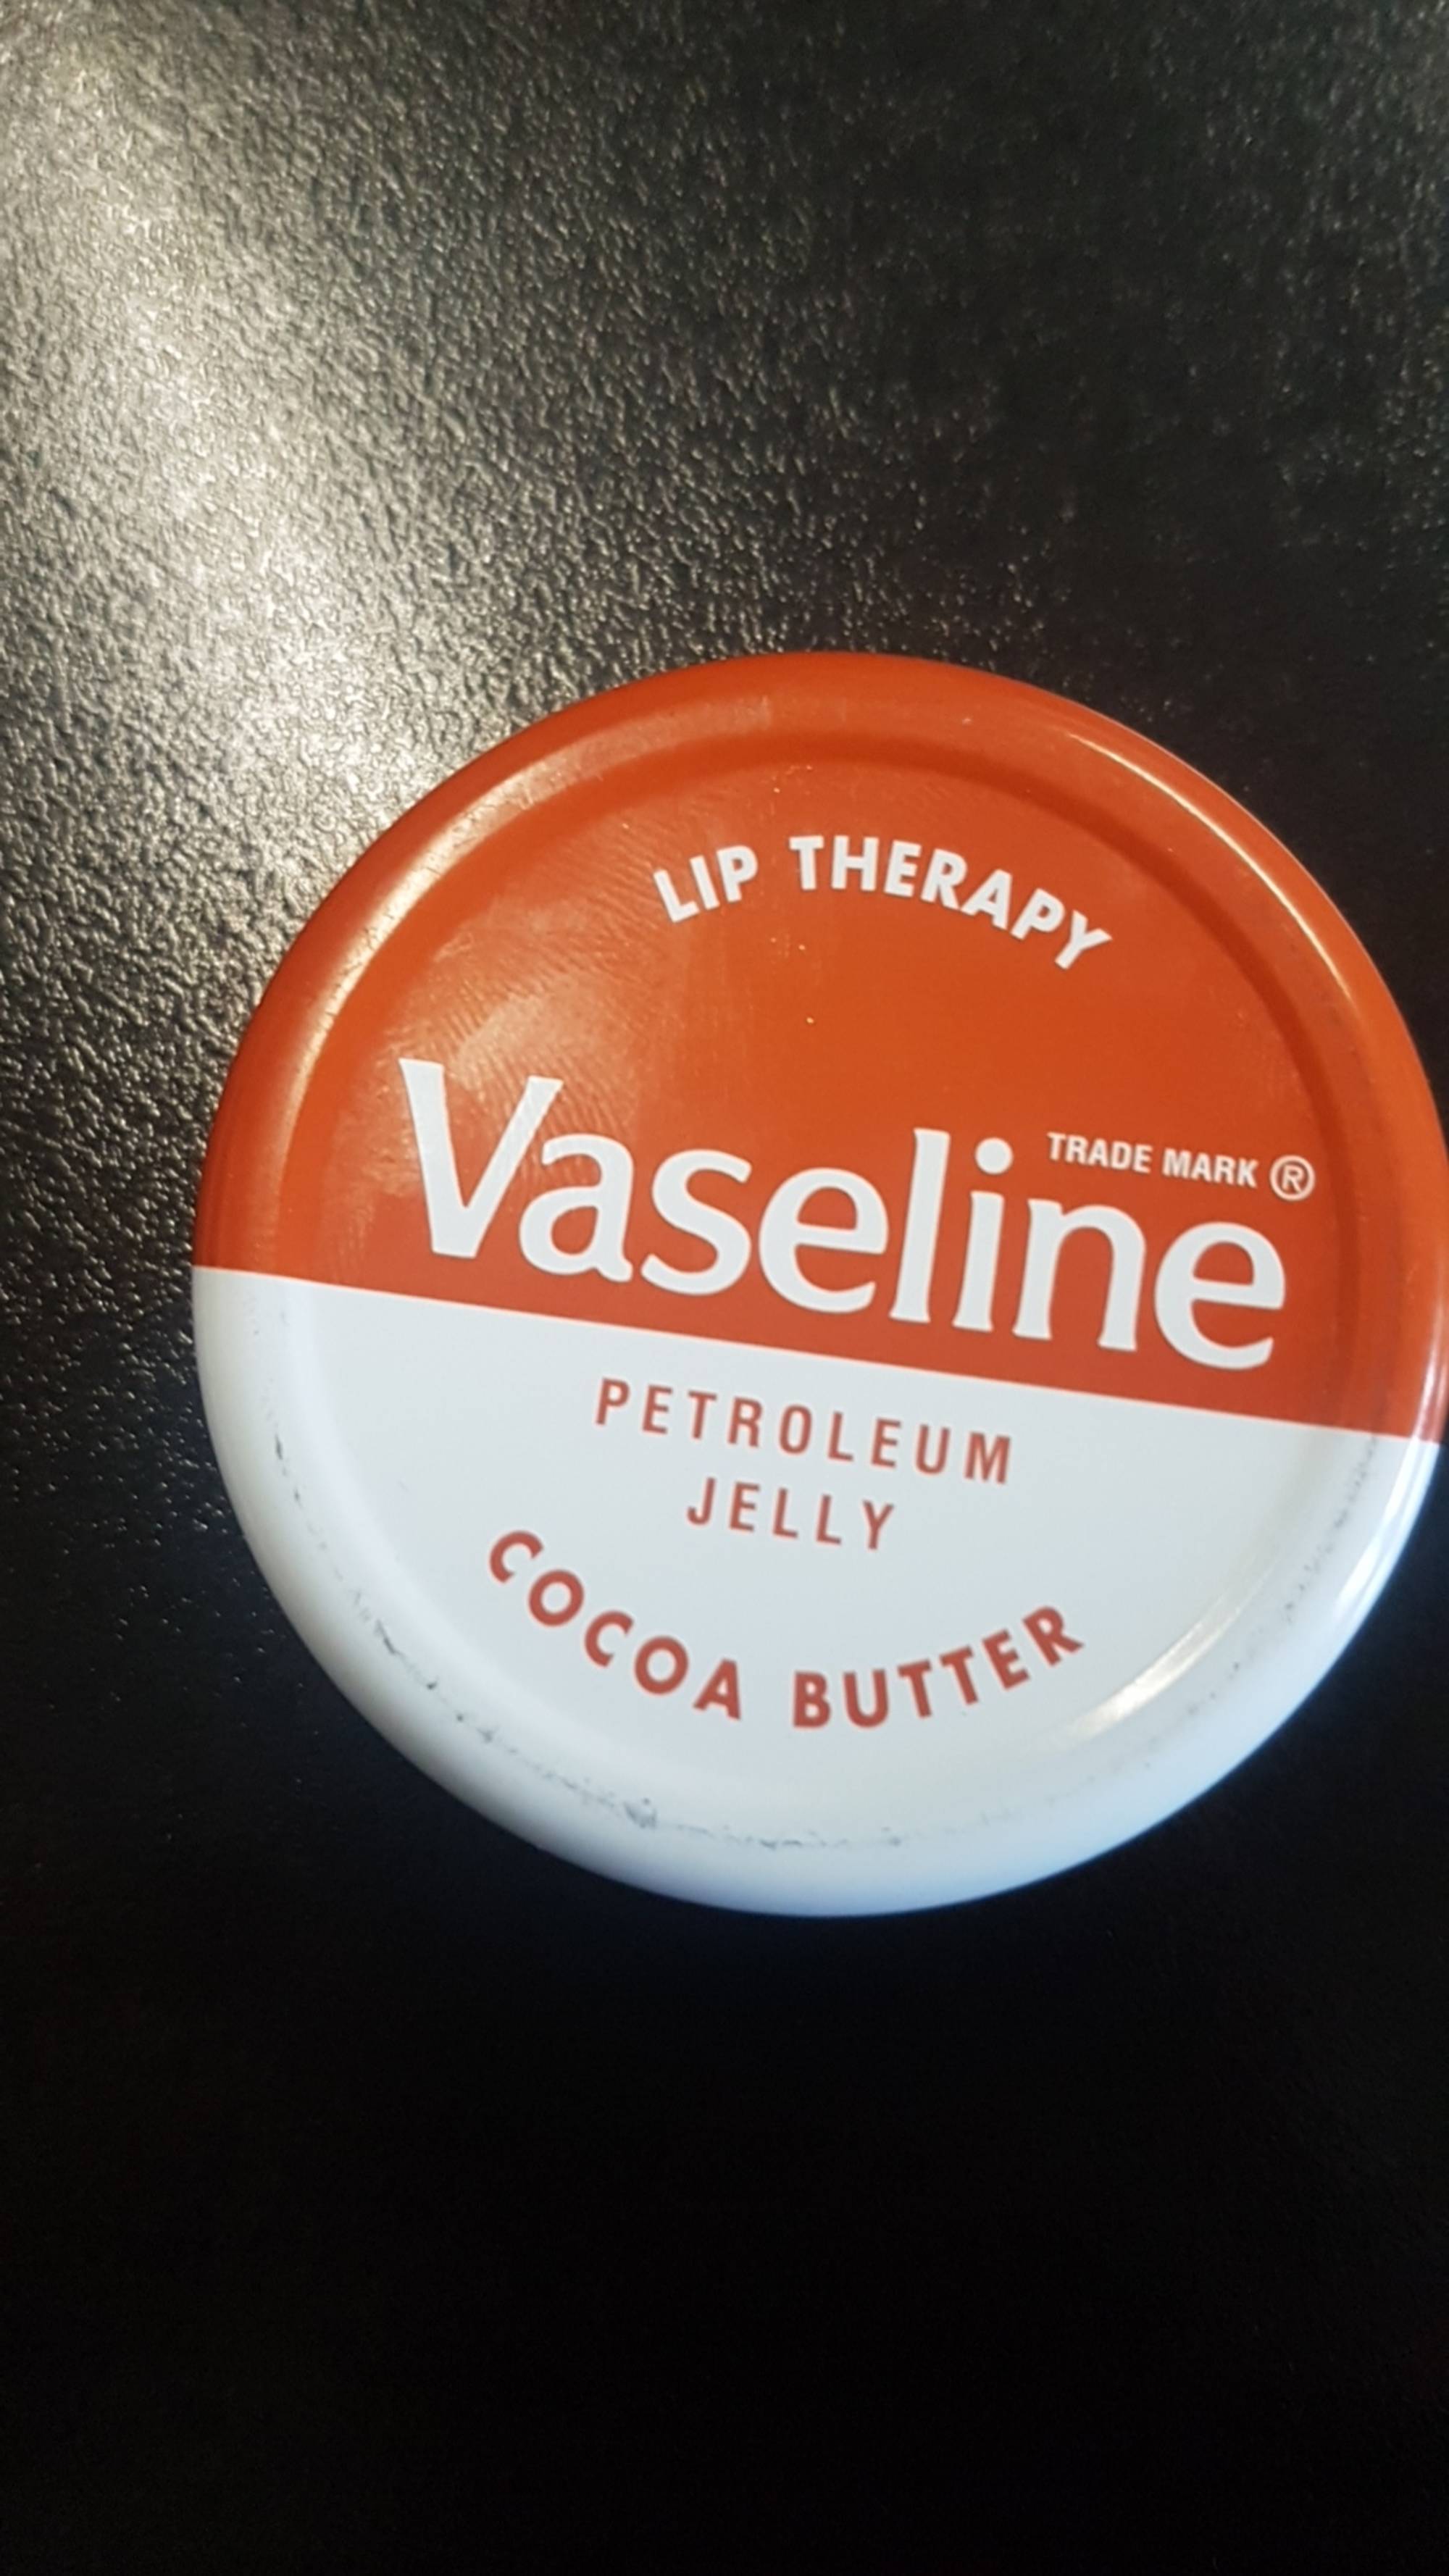 VASELINE - Lip therapy - Petroleum jelly cocoa butter